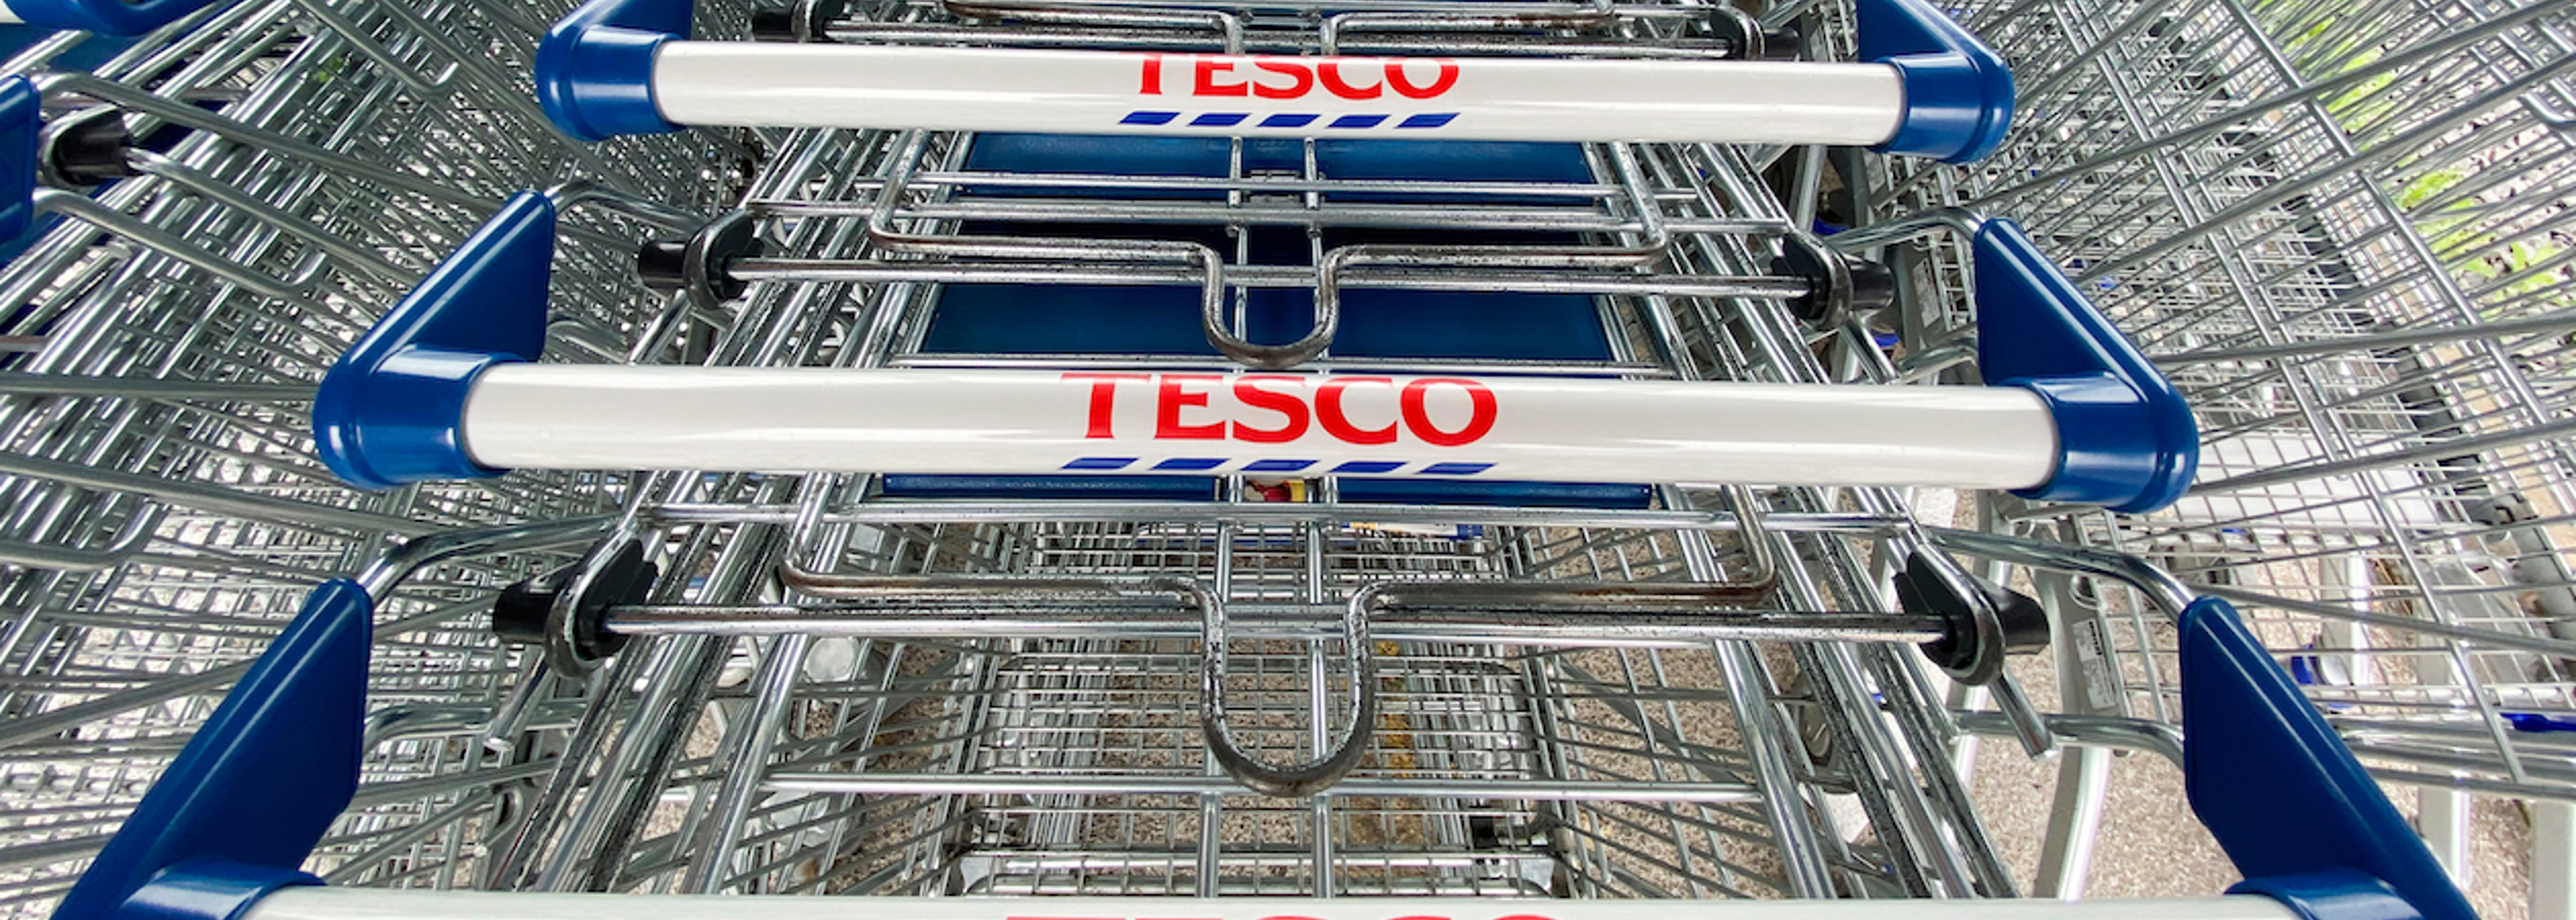 EHPs in Tesco use-by dates case will assist other authorities